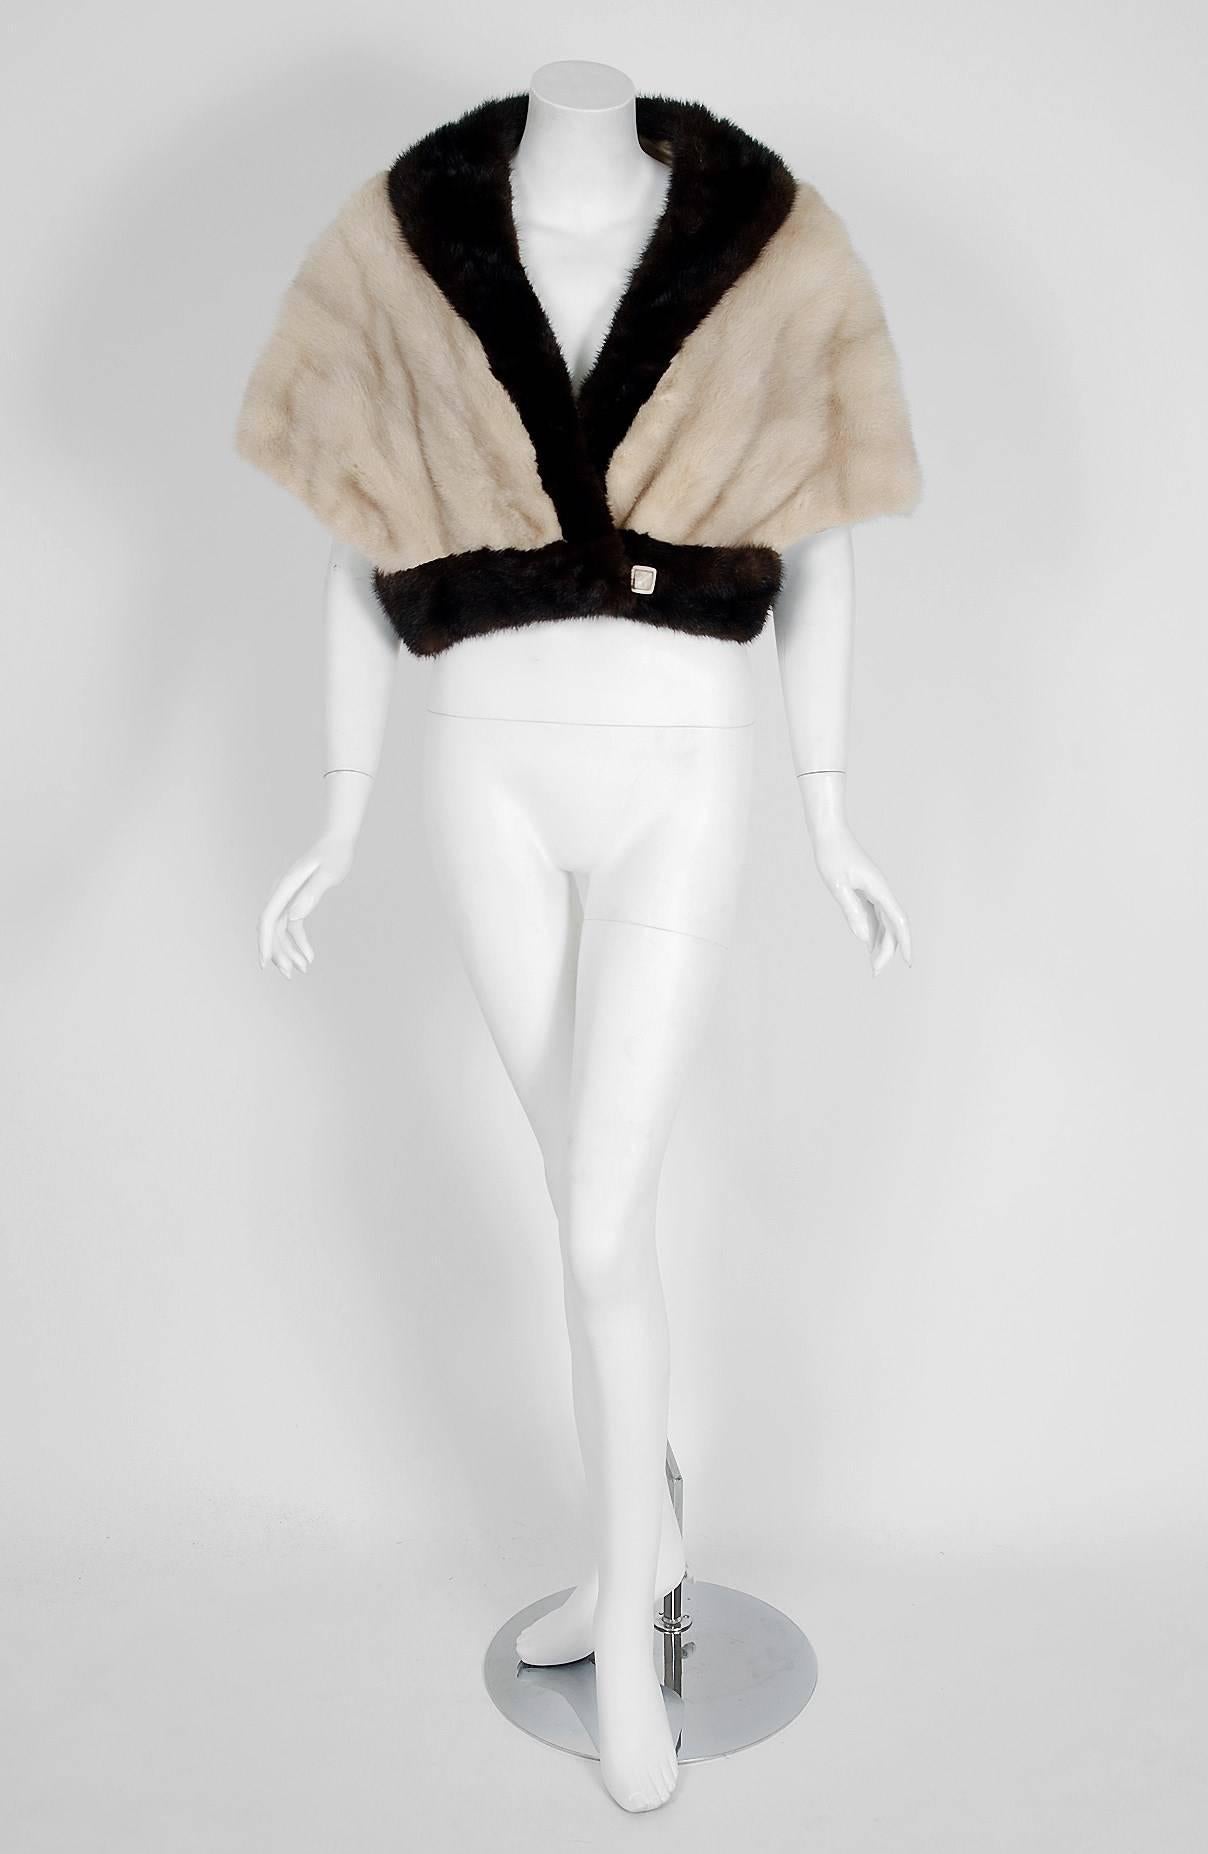 An extraordinary, ivory-white & chocolate-brown block color genuine mink-fur that will make any woman shine during the upcoming winter season! It is easy to see the level of quality in this piece; the fur is extremely supple and soft. The jacket is